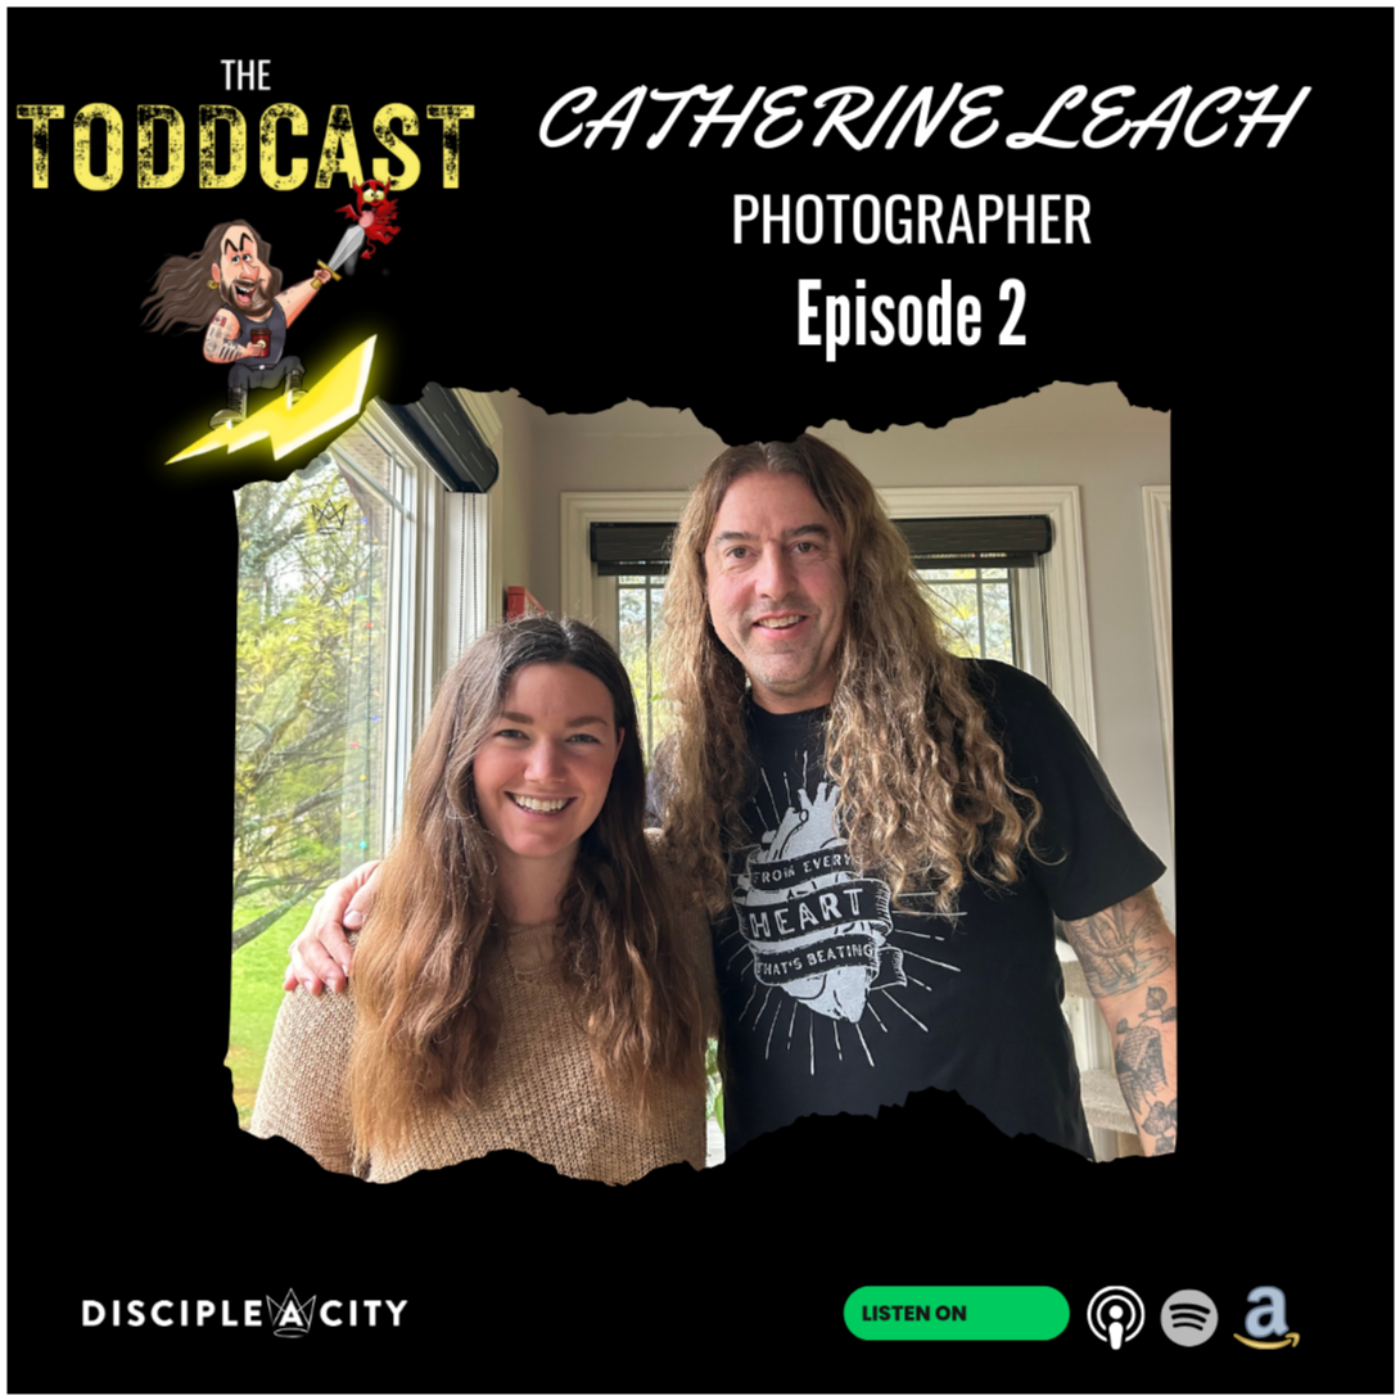 The Toddcast - Catherine Leach (Photographer)